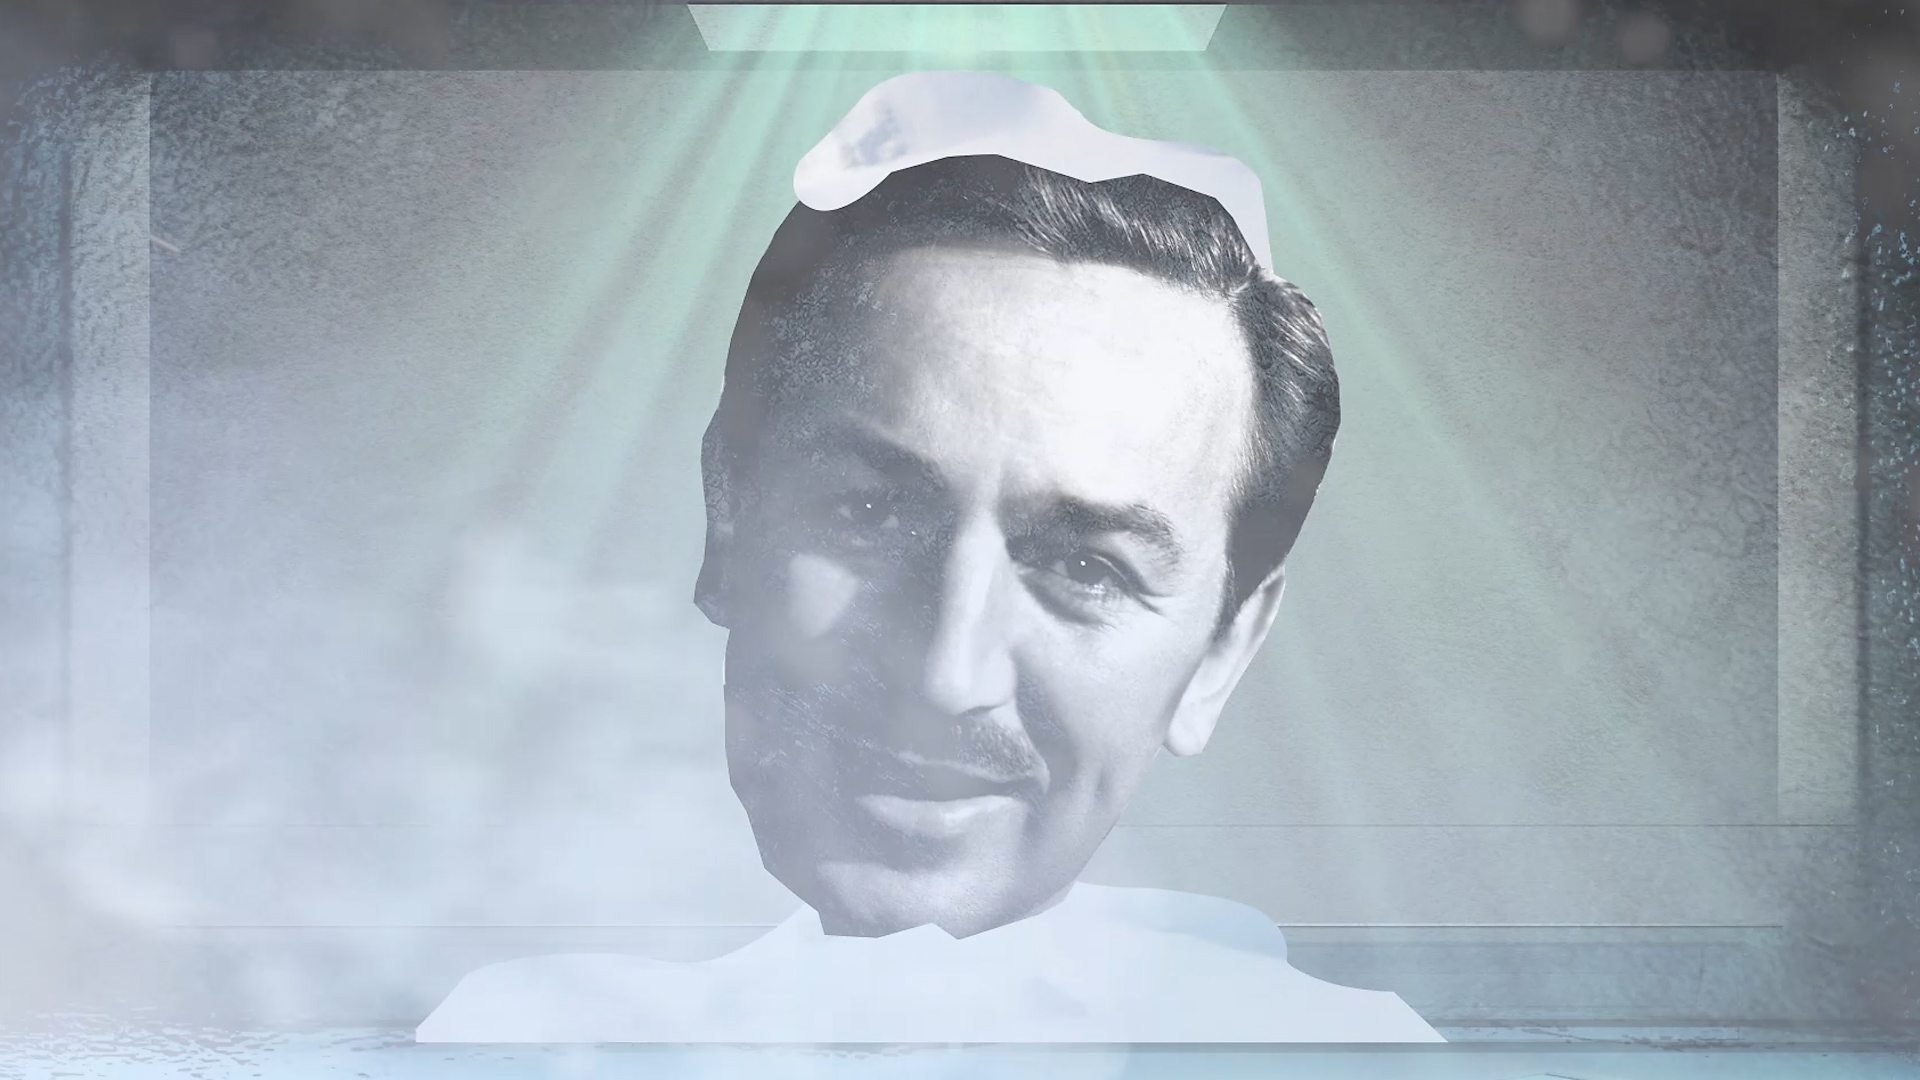 Disney Theory: Was Frozen Created To Hide The Truth About Walt Disney?